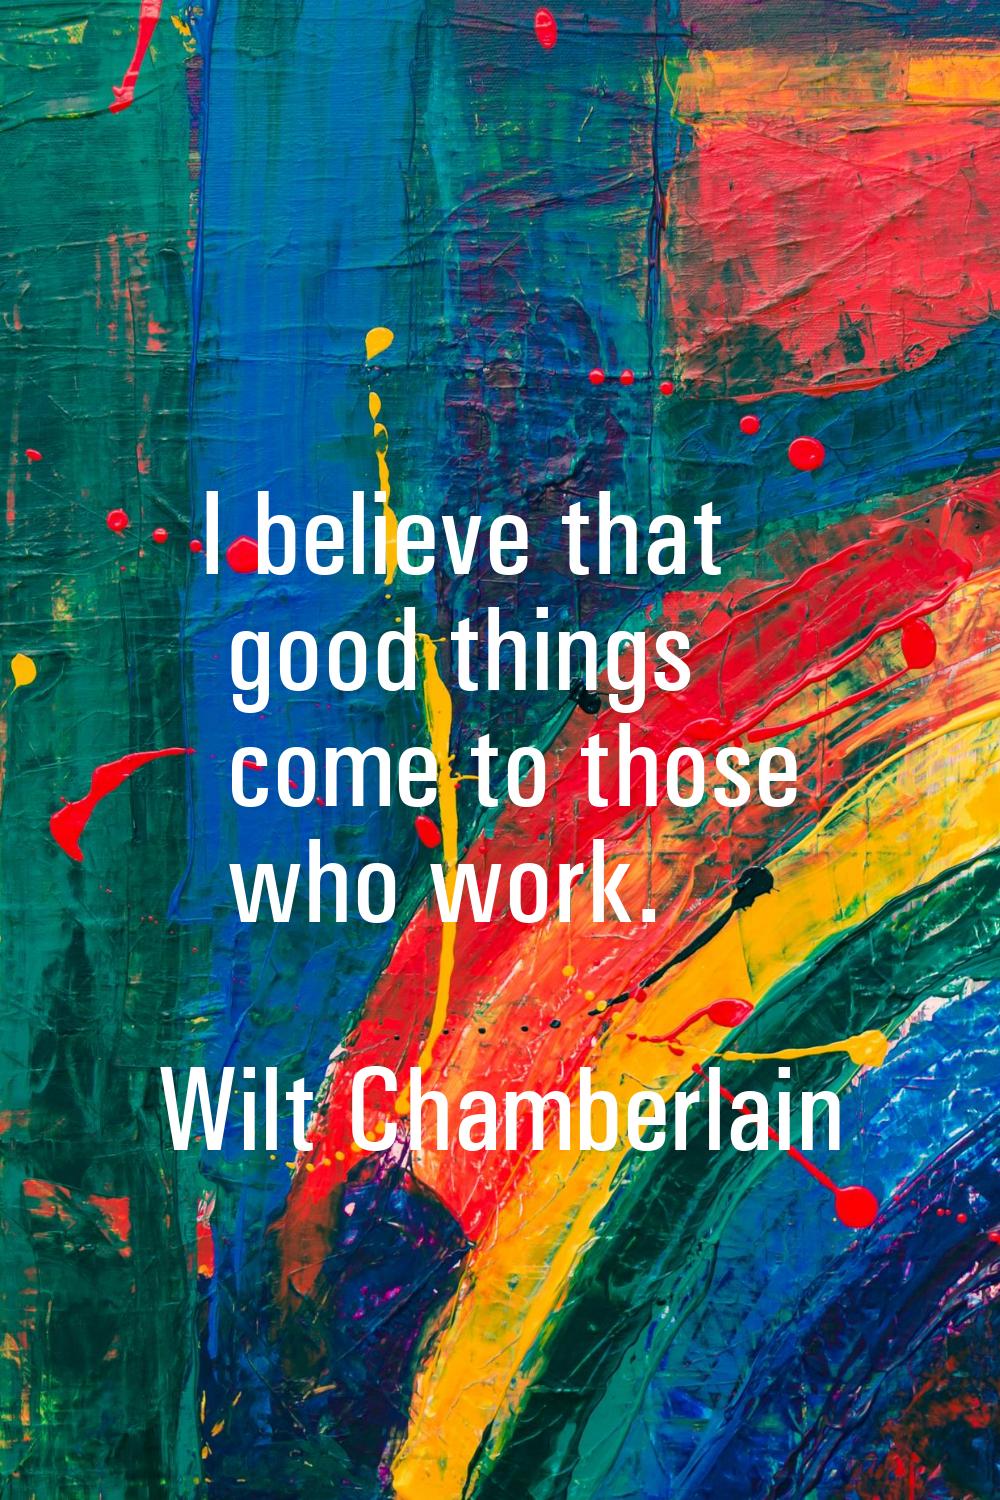 I believe that good things come to those who work.